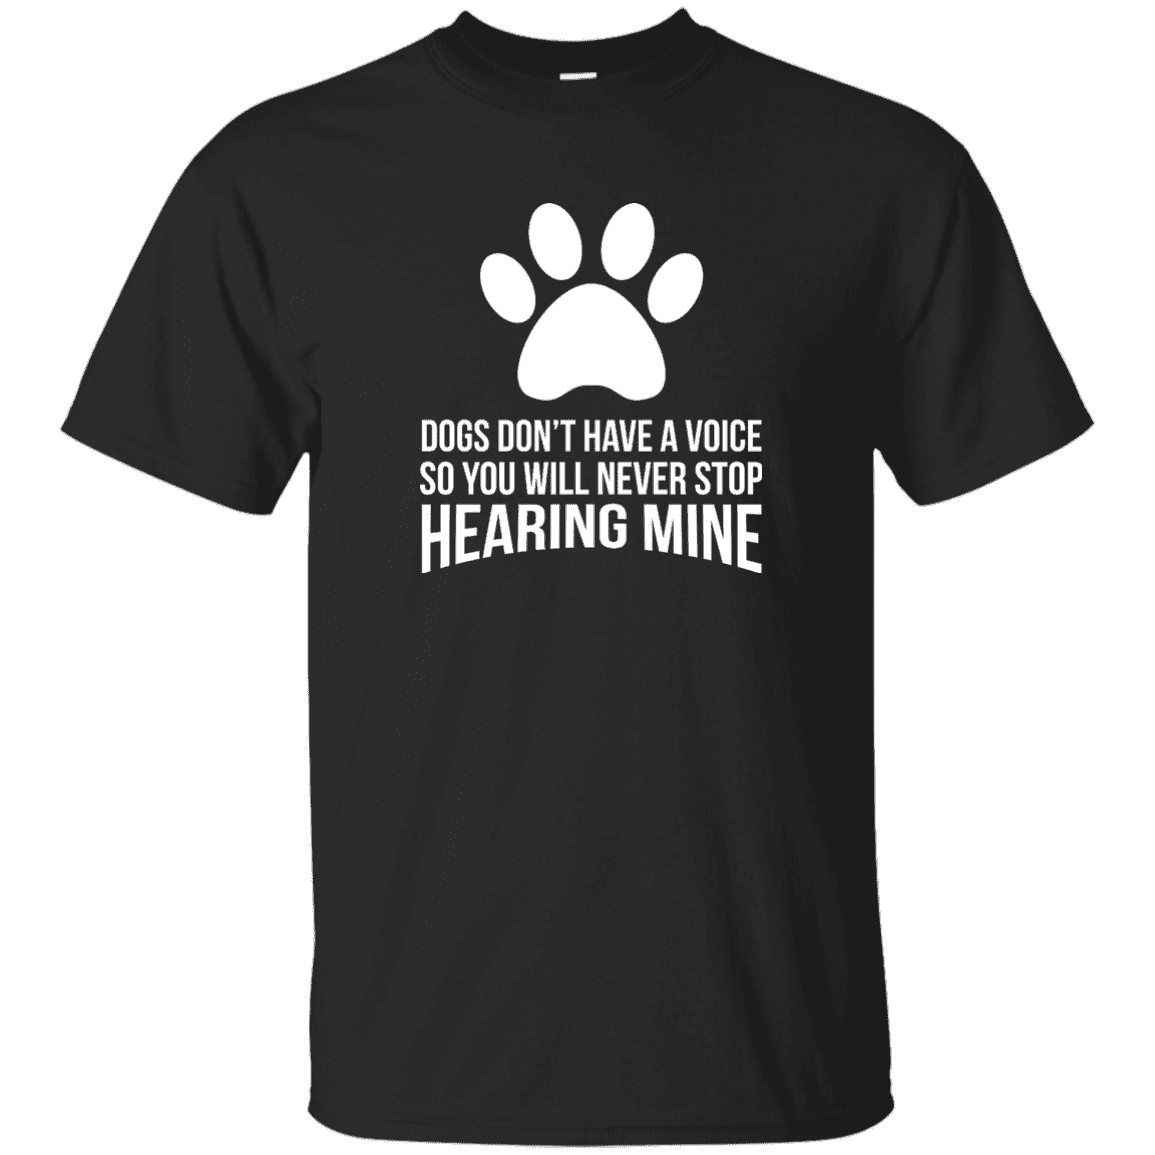 Dogs Don't Have A Voice - T Shirt.